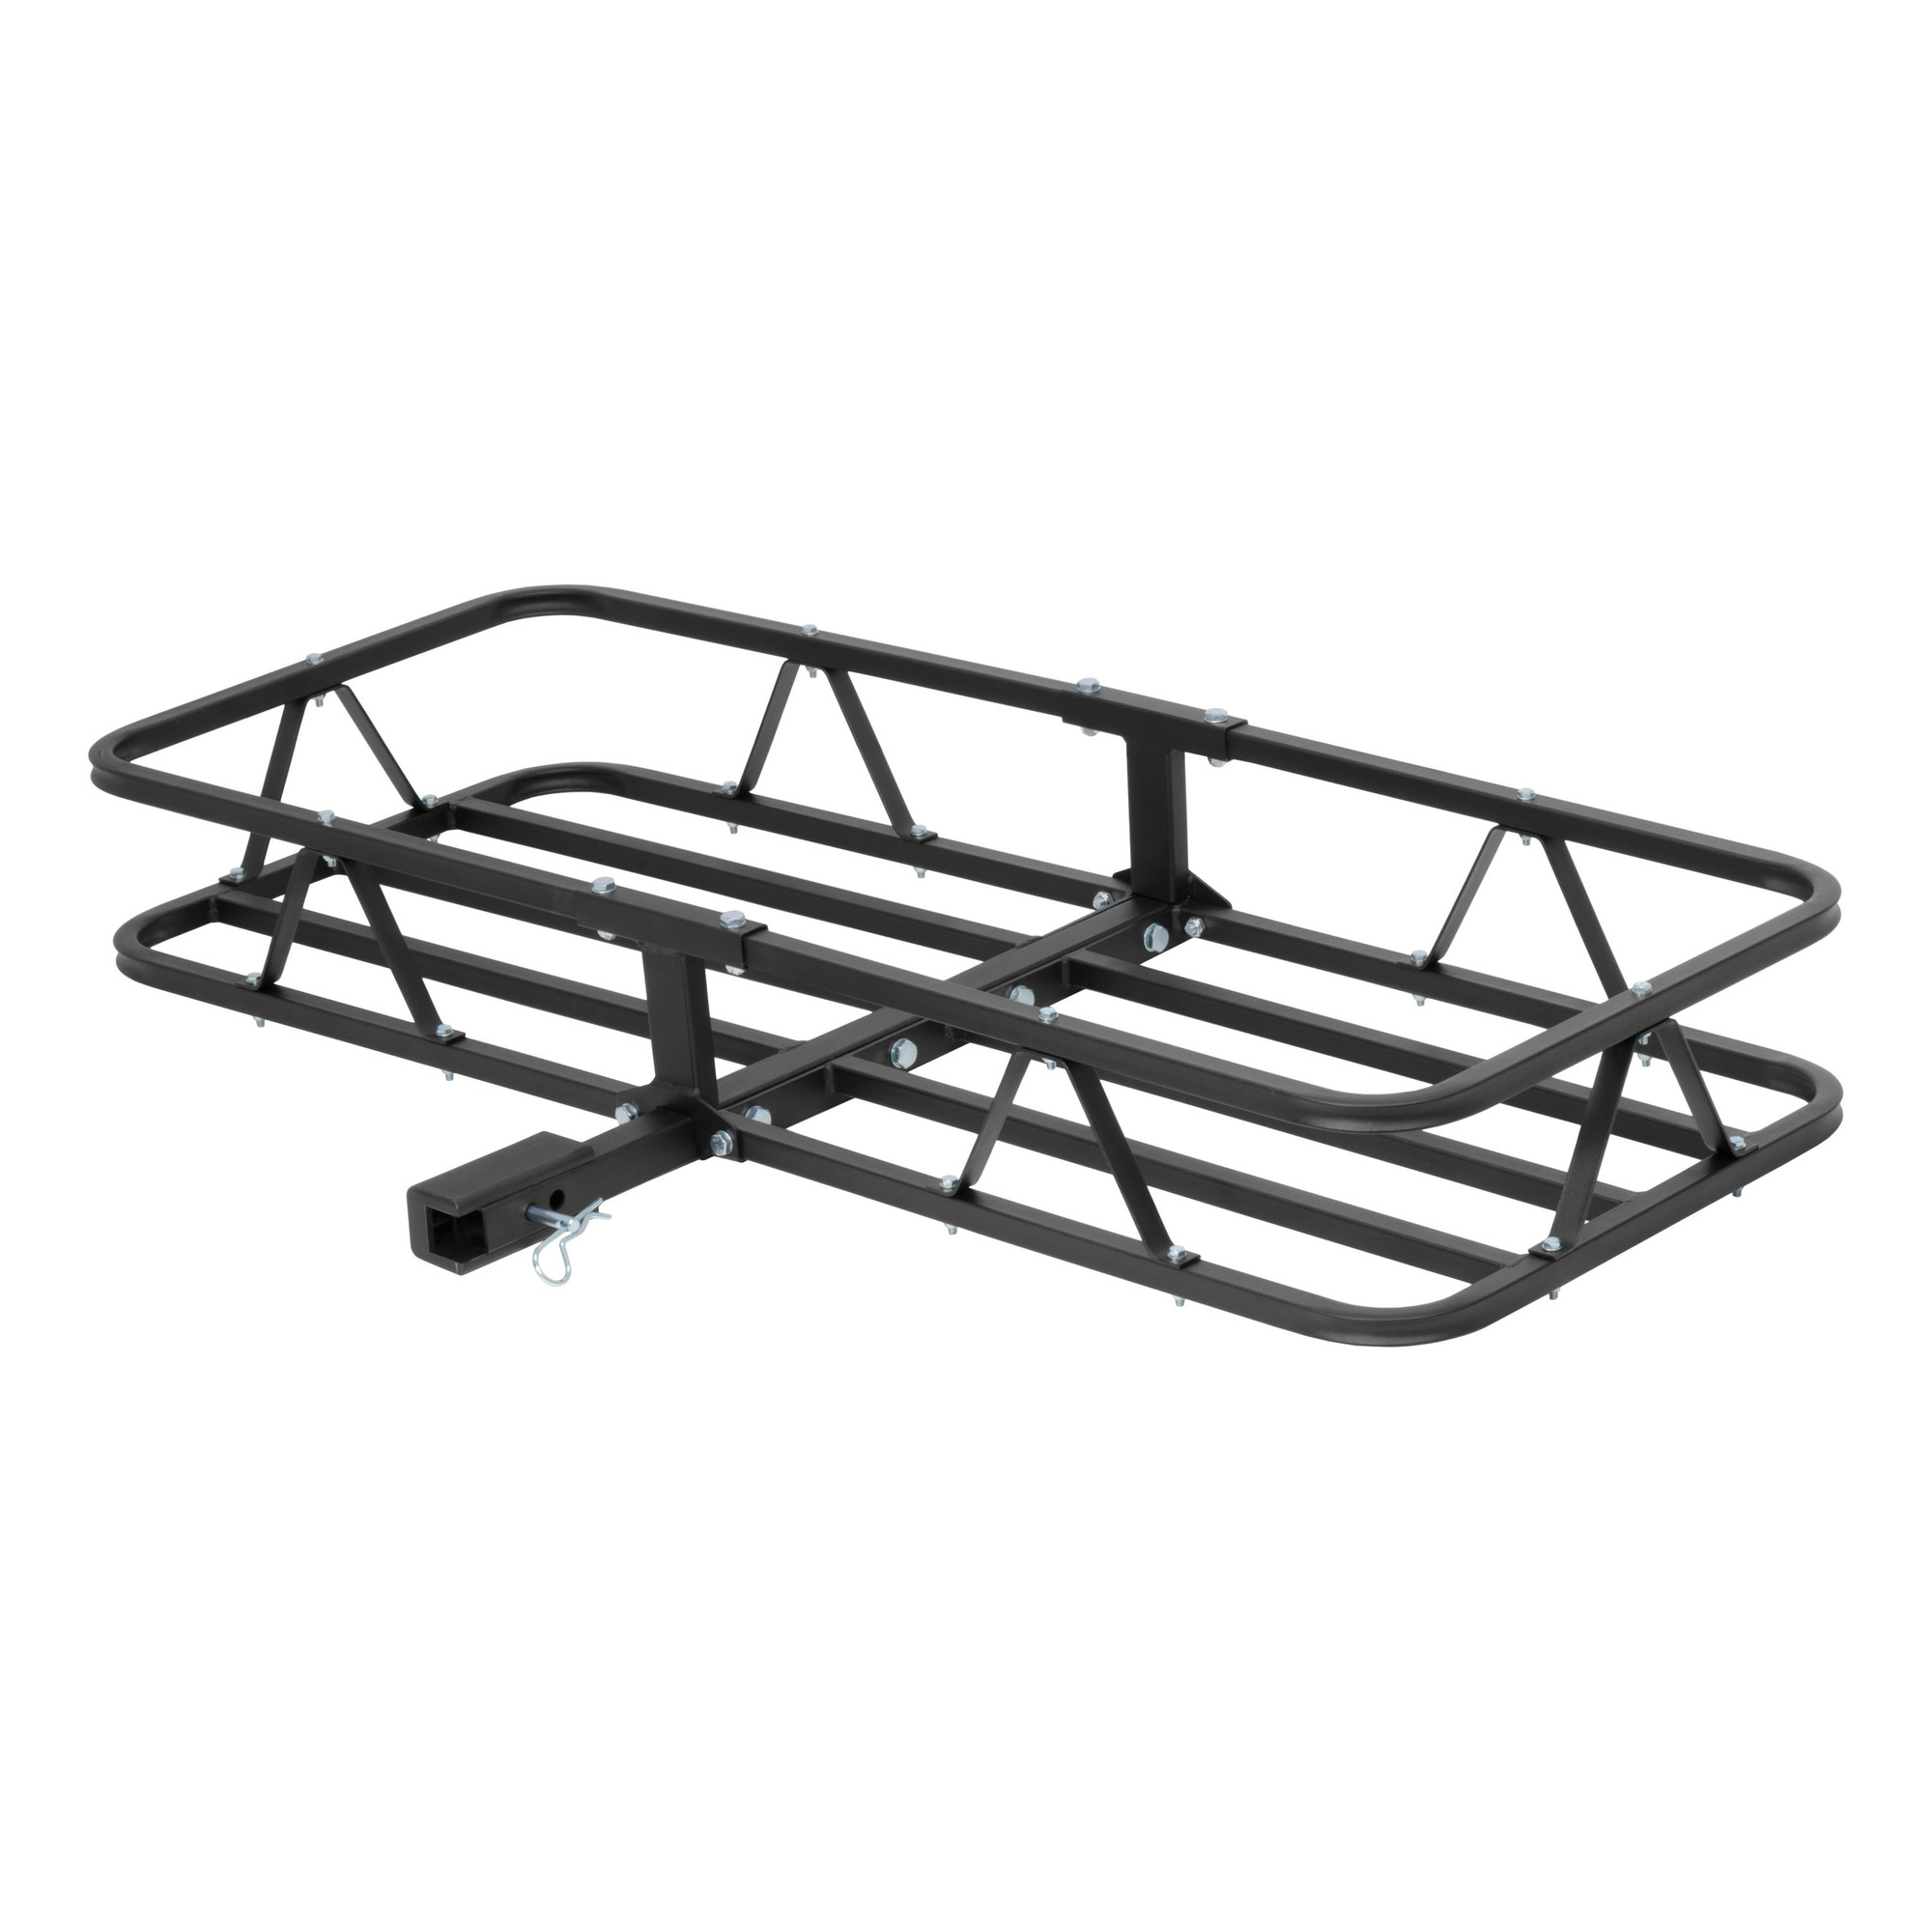 Curt Manufacturing, 48 x 20Inch Basket Hitch Cargo Carrier, Capacity 500 lb, Receiver Size 2 in, Material Steel, Model 18145